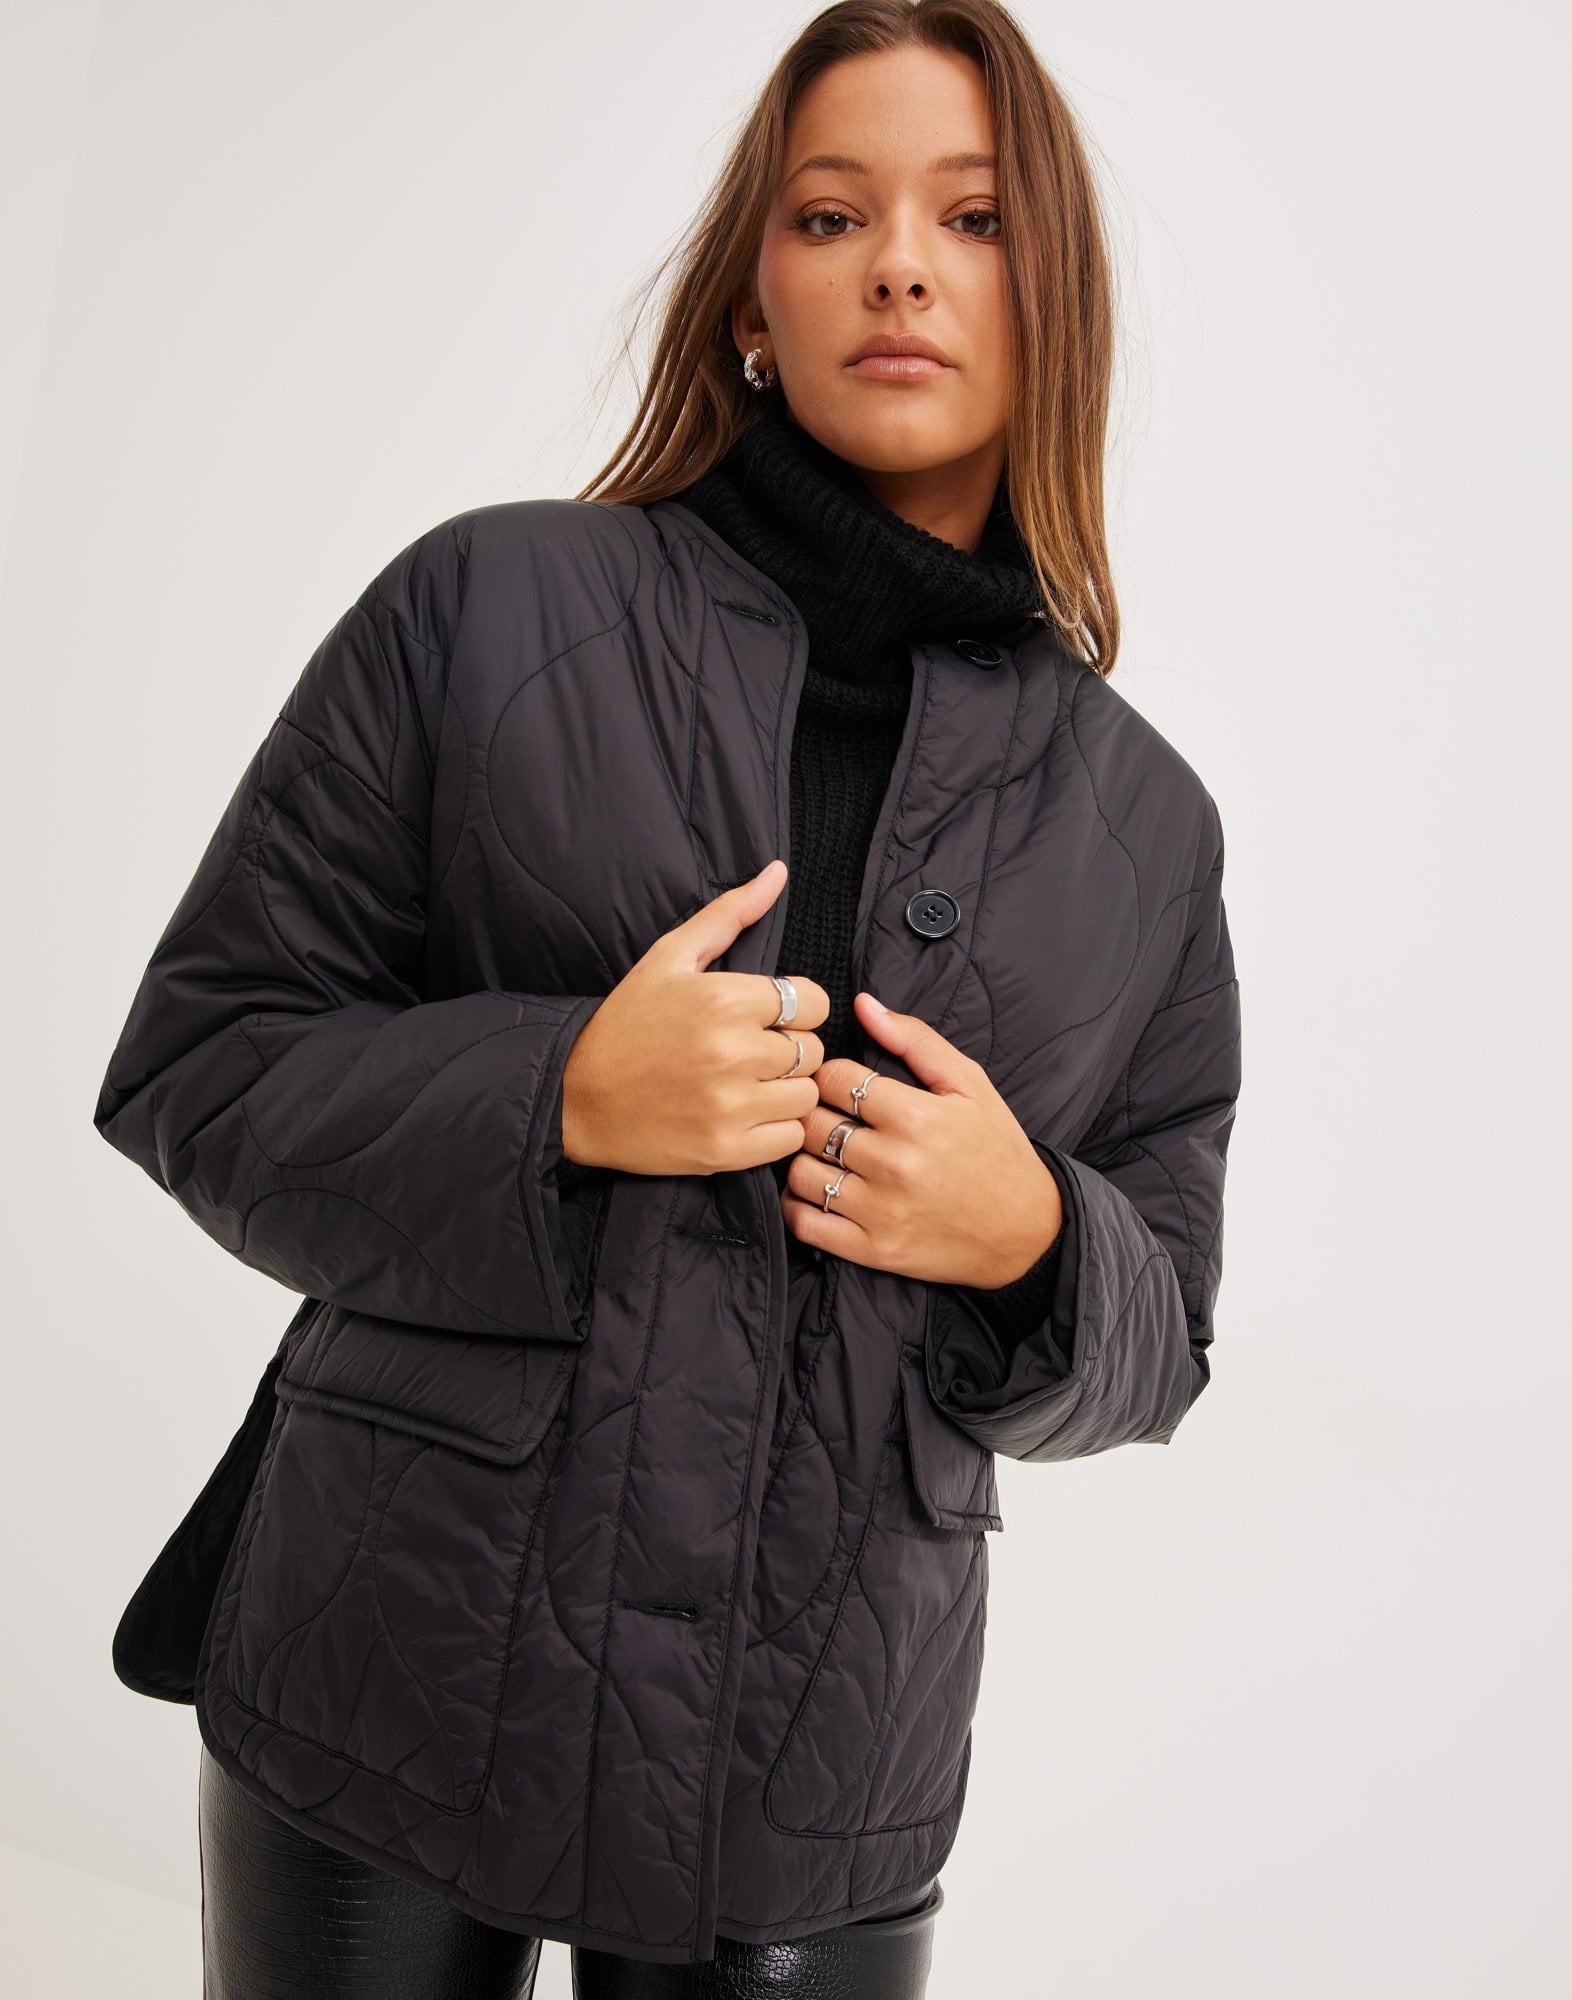 Roxy quilted jacket